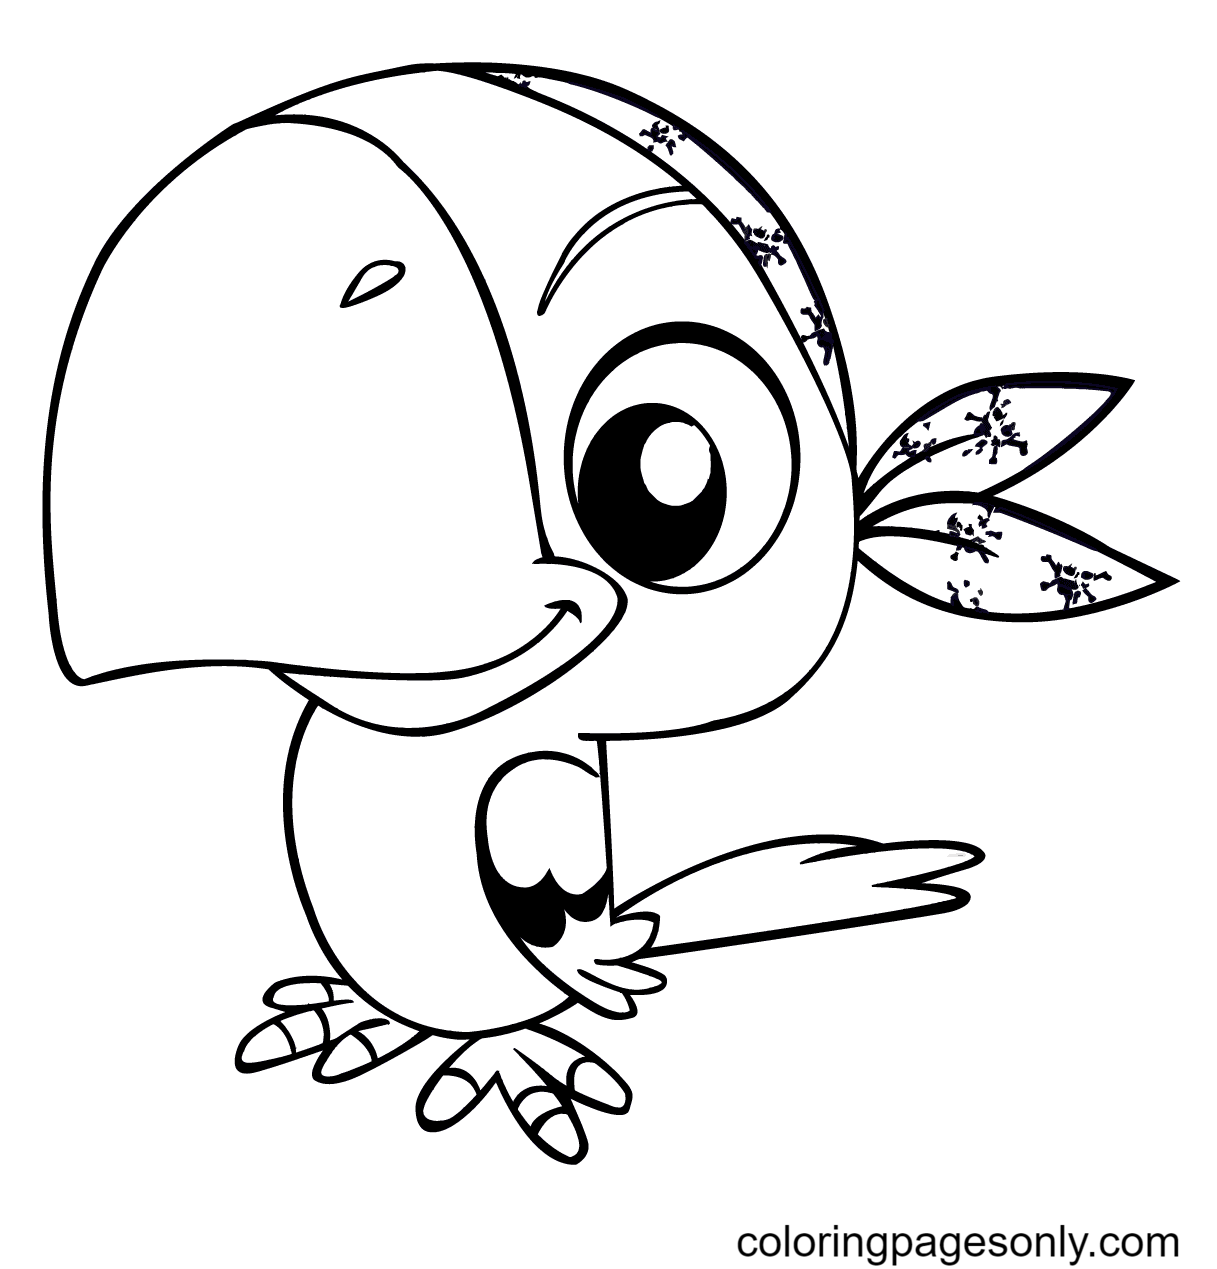 Cartoon Pirate Parrot Coloring Page